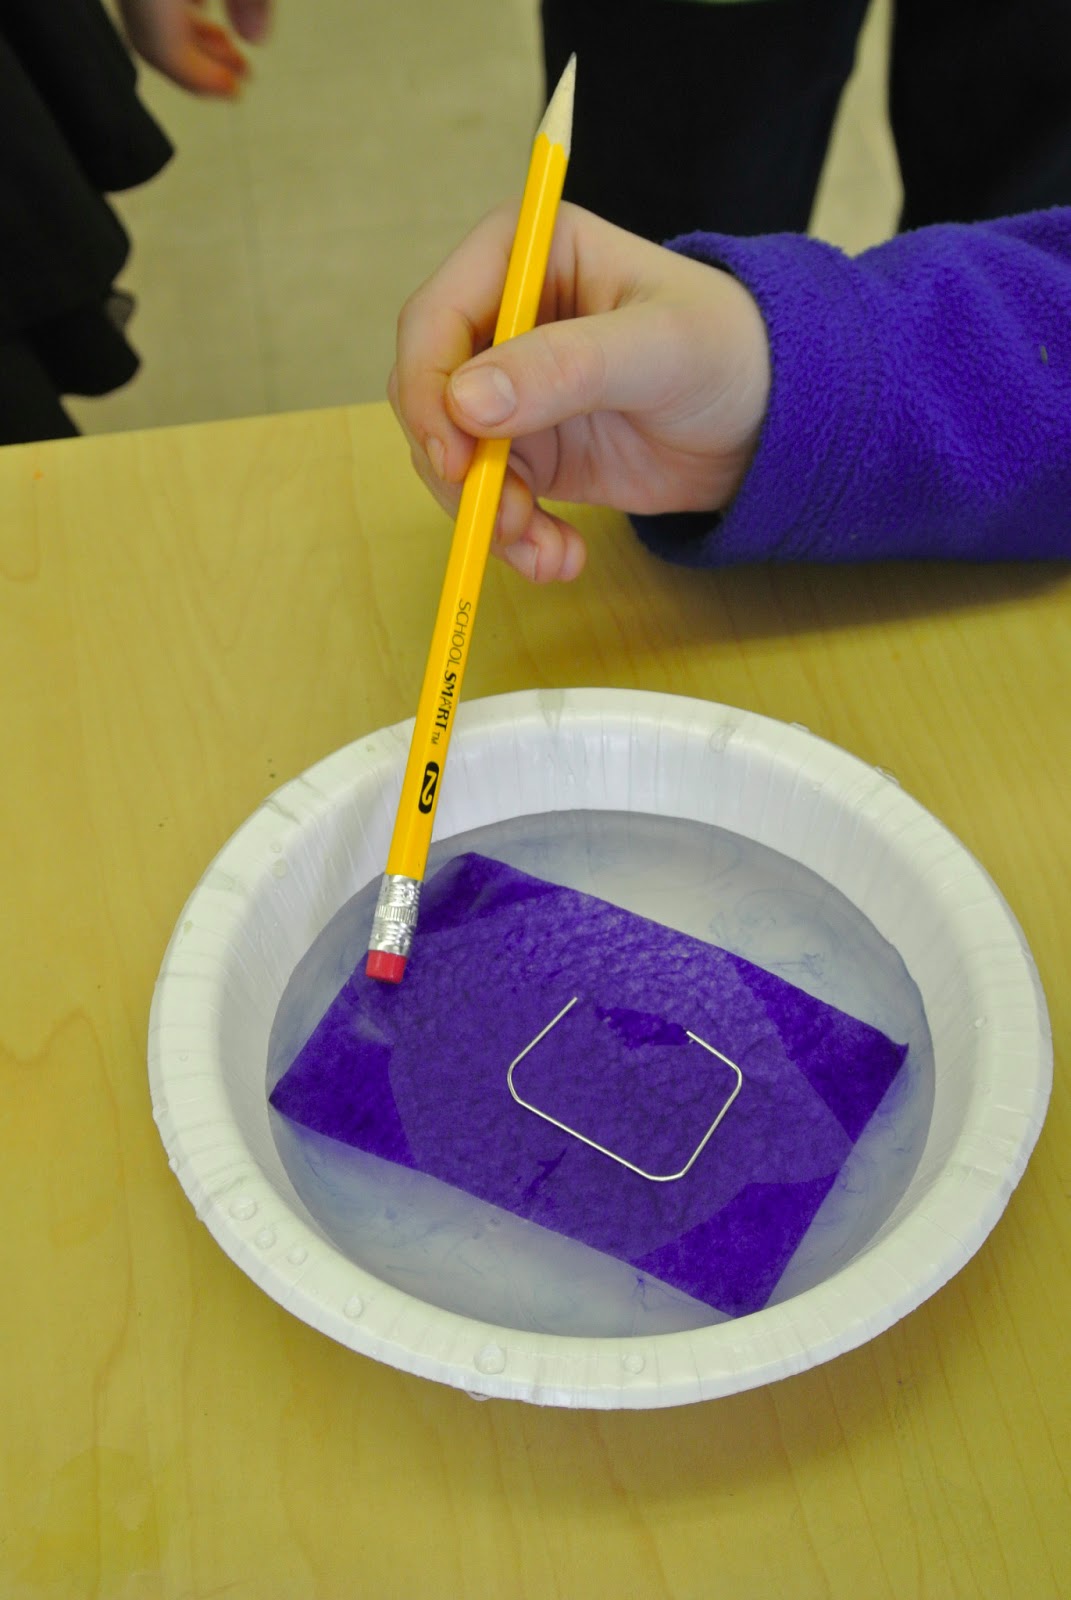 How do you make a paper clip float on water?